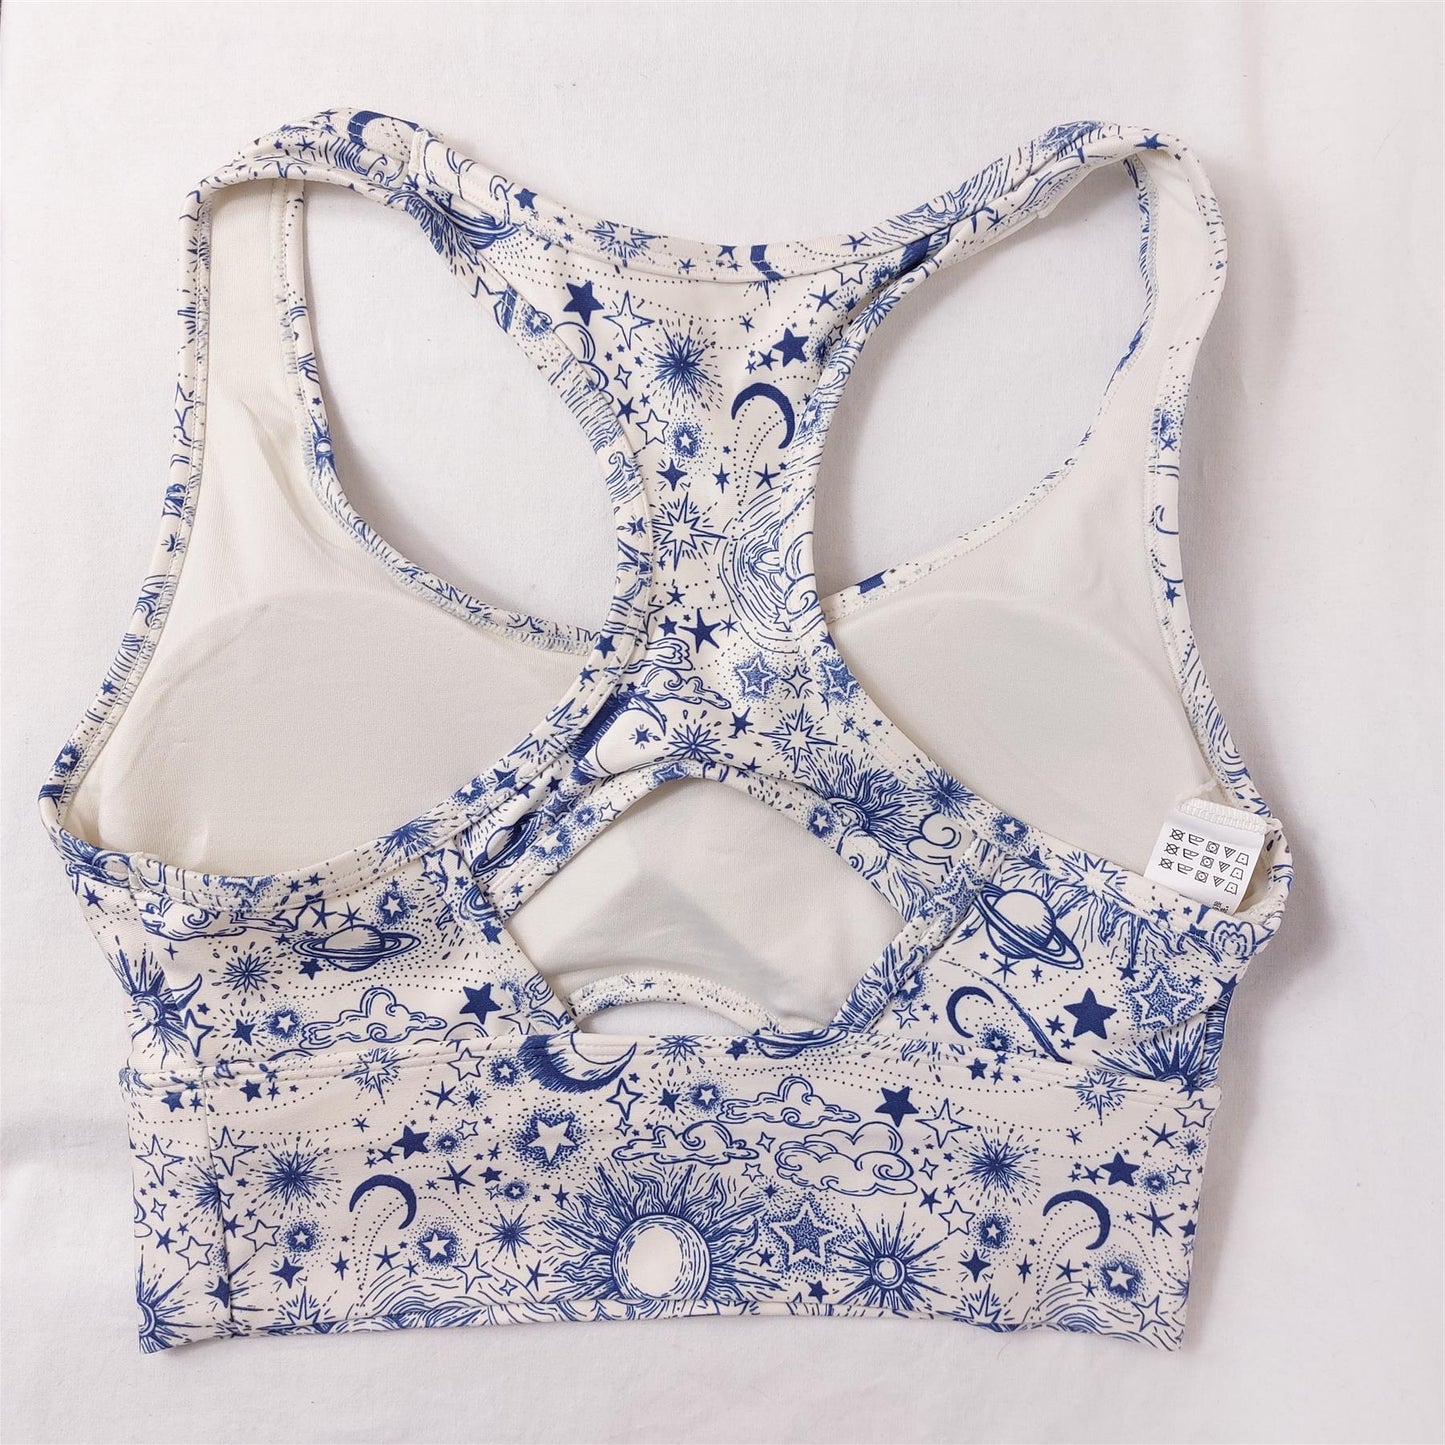 Wildfox Sports Gym Bra Yoga Top Non-Wired Removable Padding Blue & White Stars